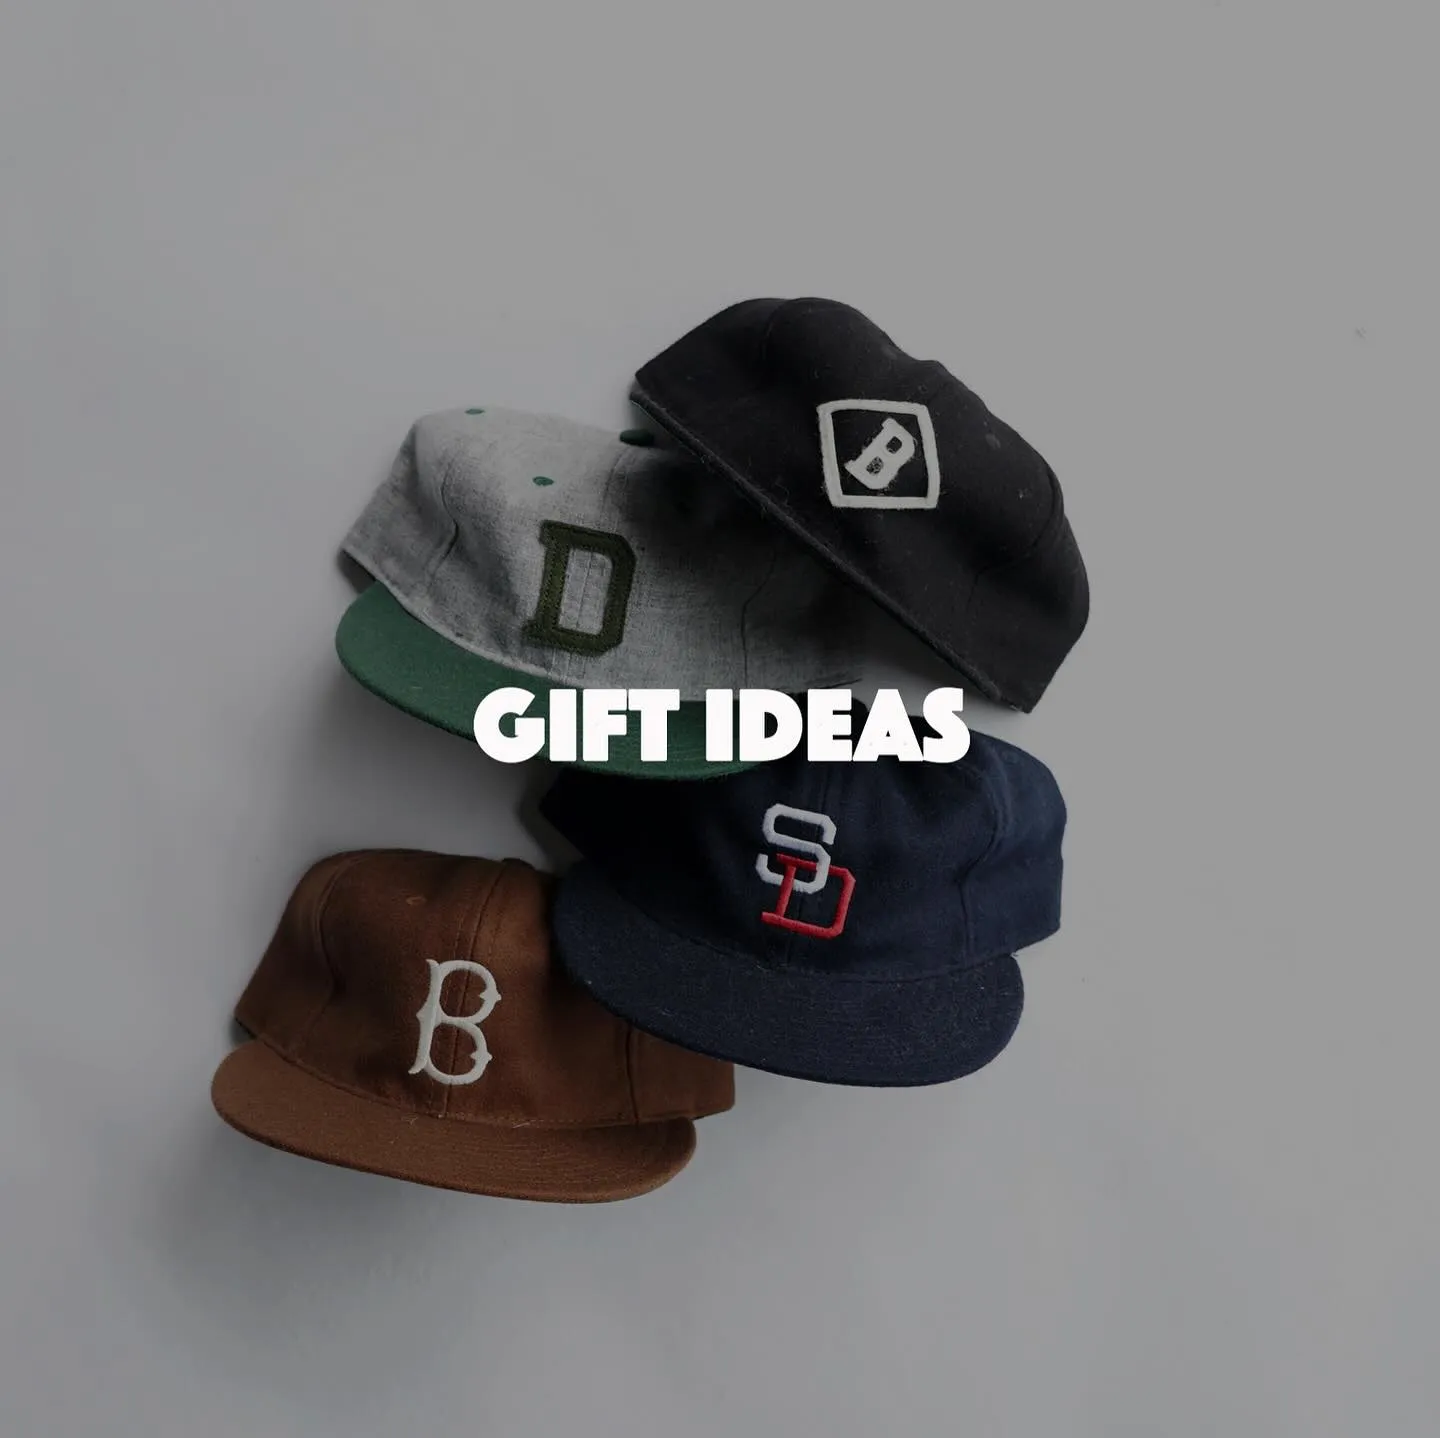 【CONNECT/S GIFT IDEAS】